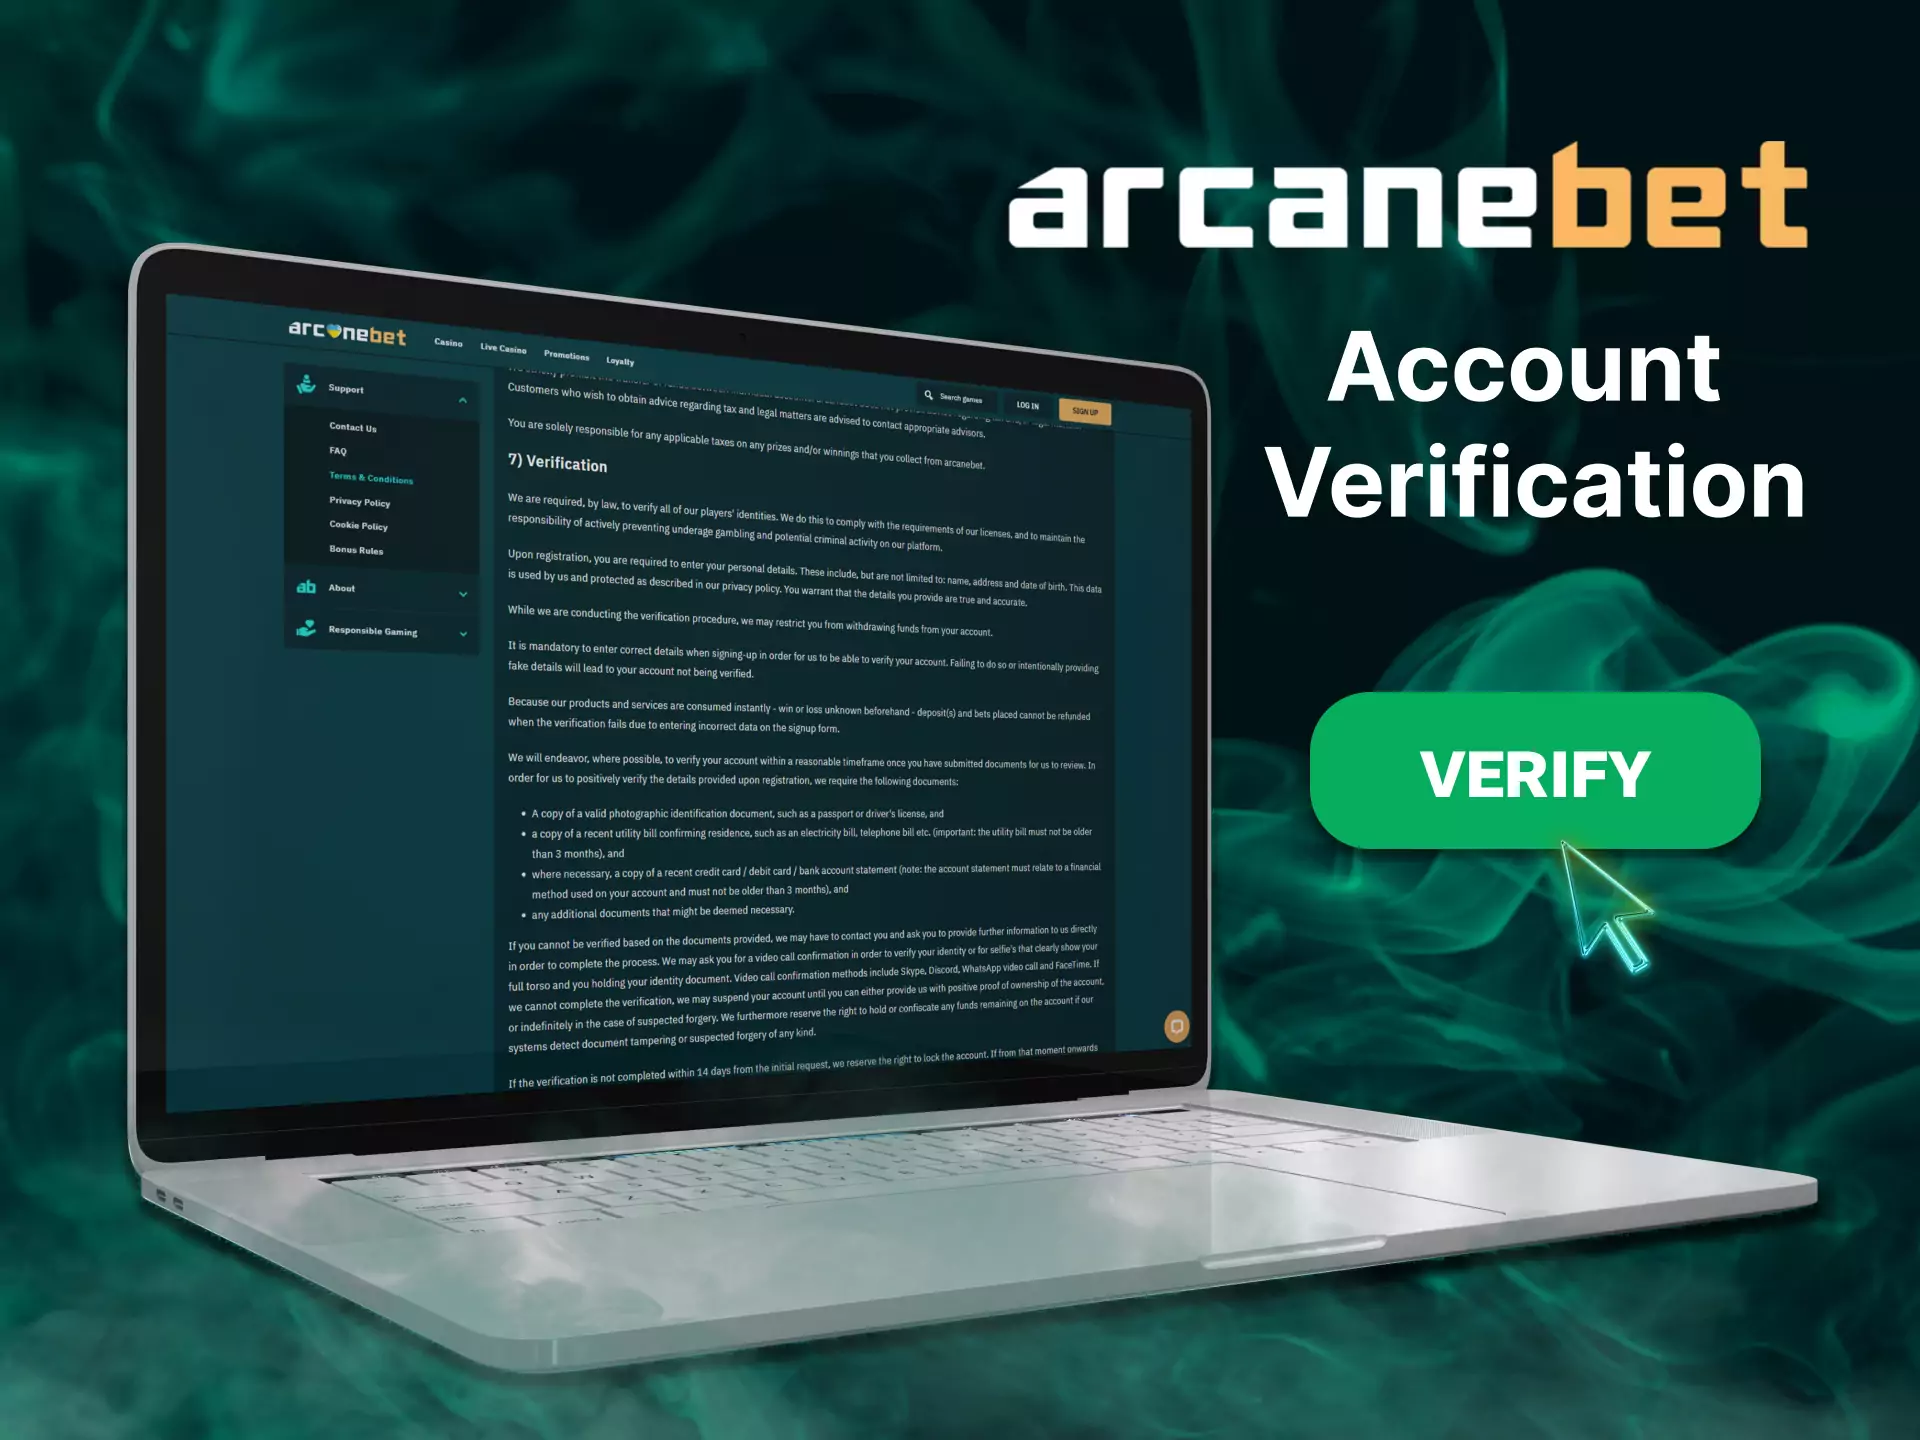 Go through a simple verification of Arcanebet and use all the functions.